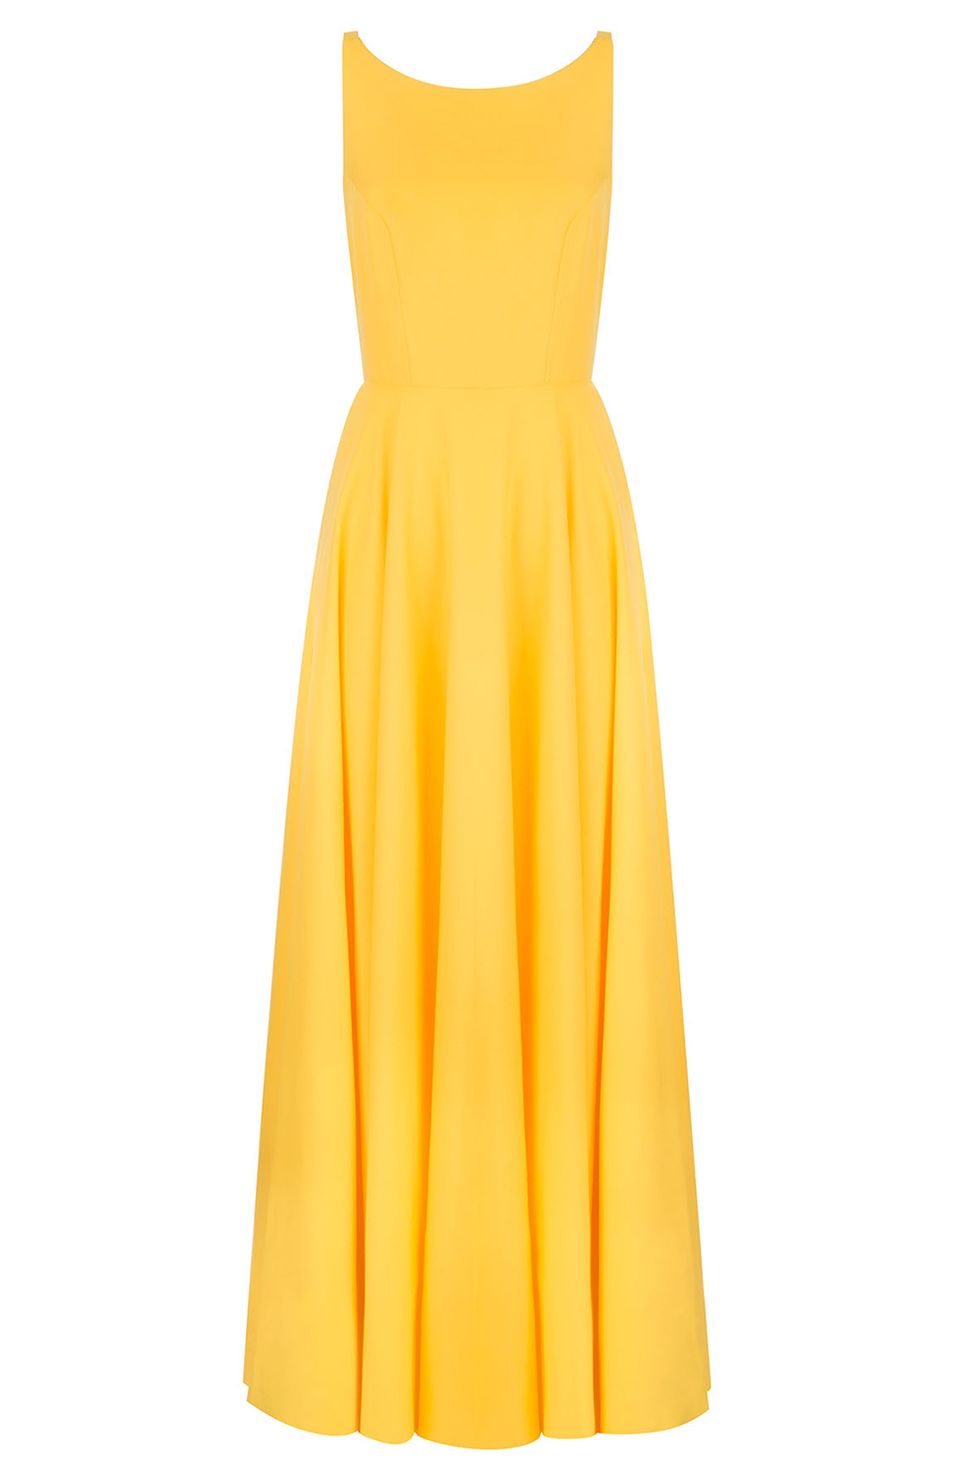 Clothing, Dress, Day dress, Yellow, Orange, Cocktail dress, A-line, Strapless dress, Gown, Neck, 